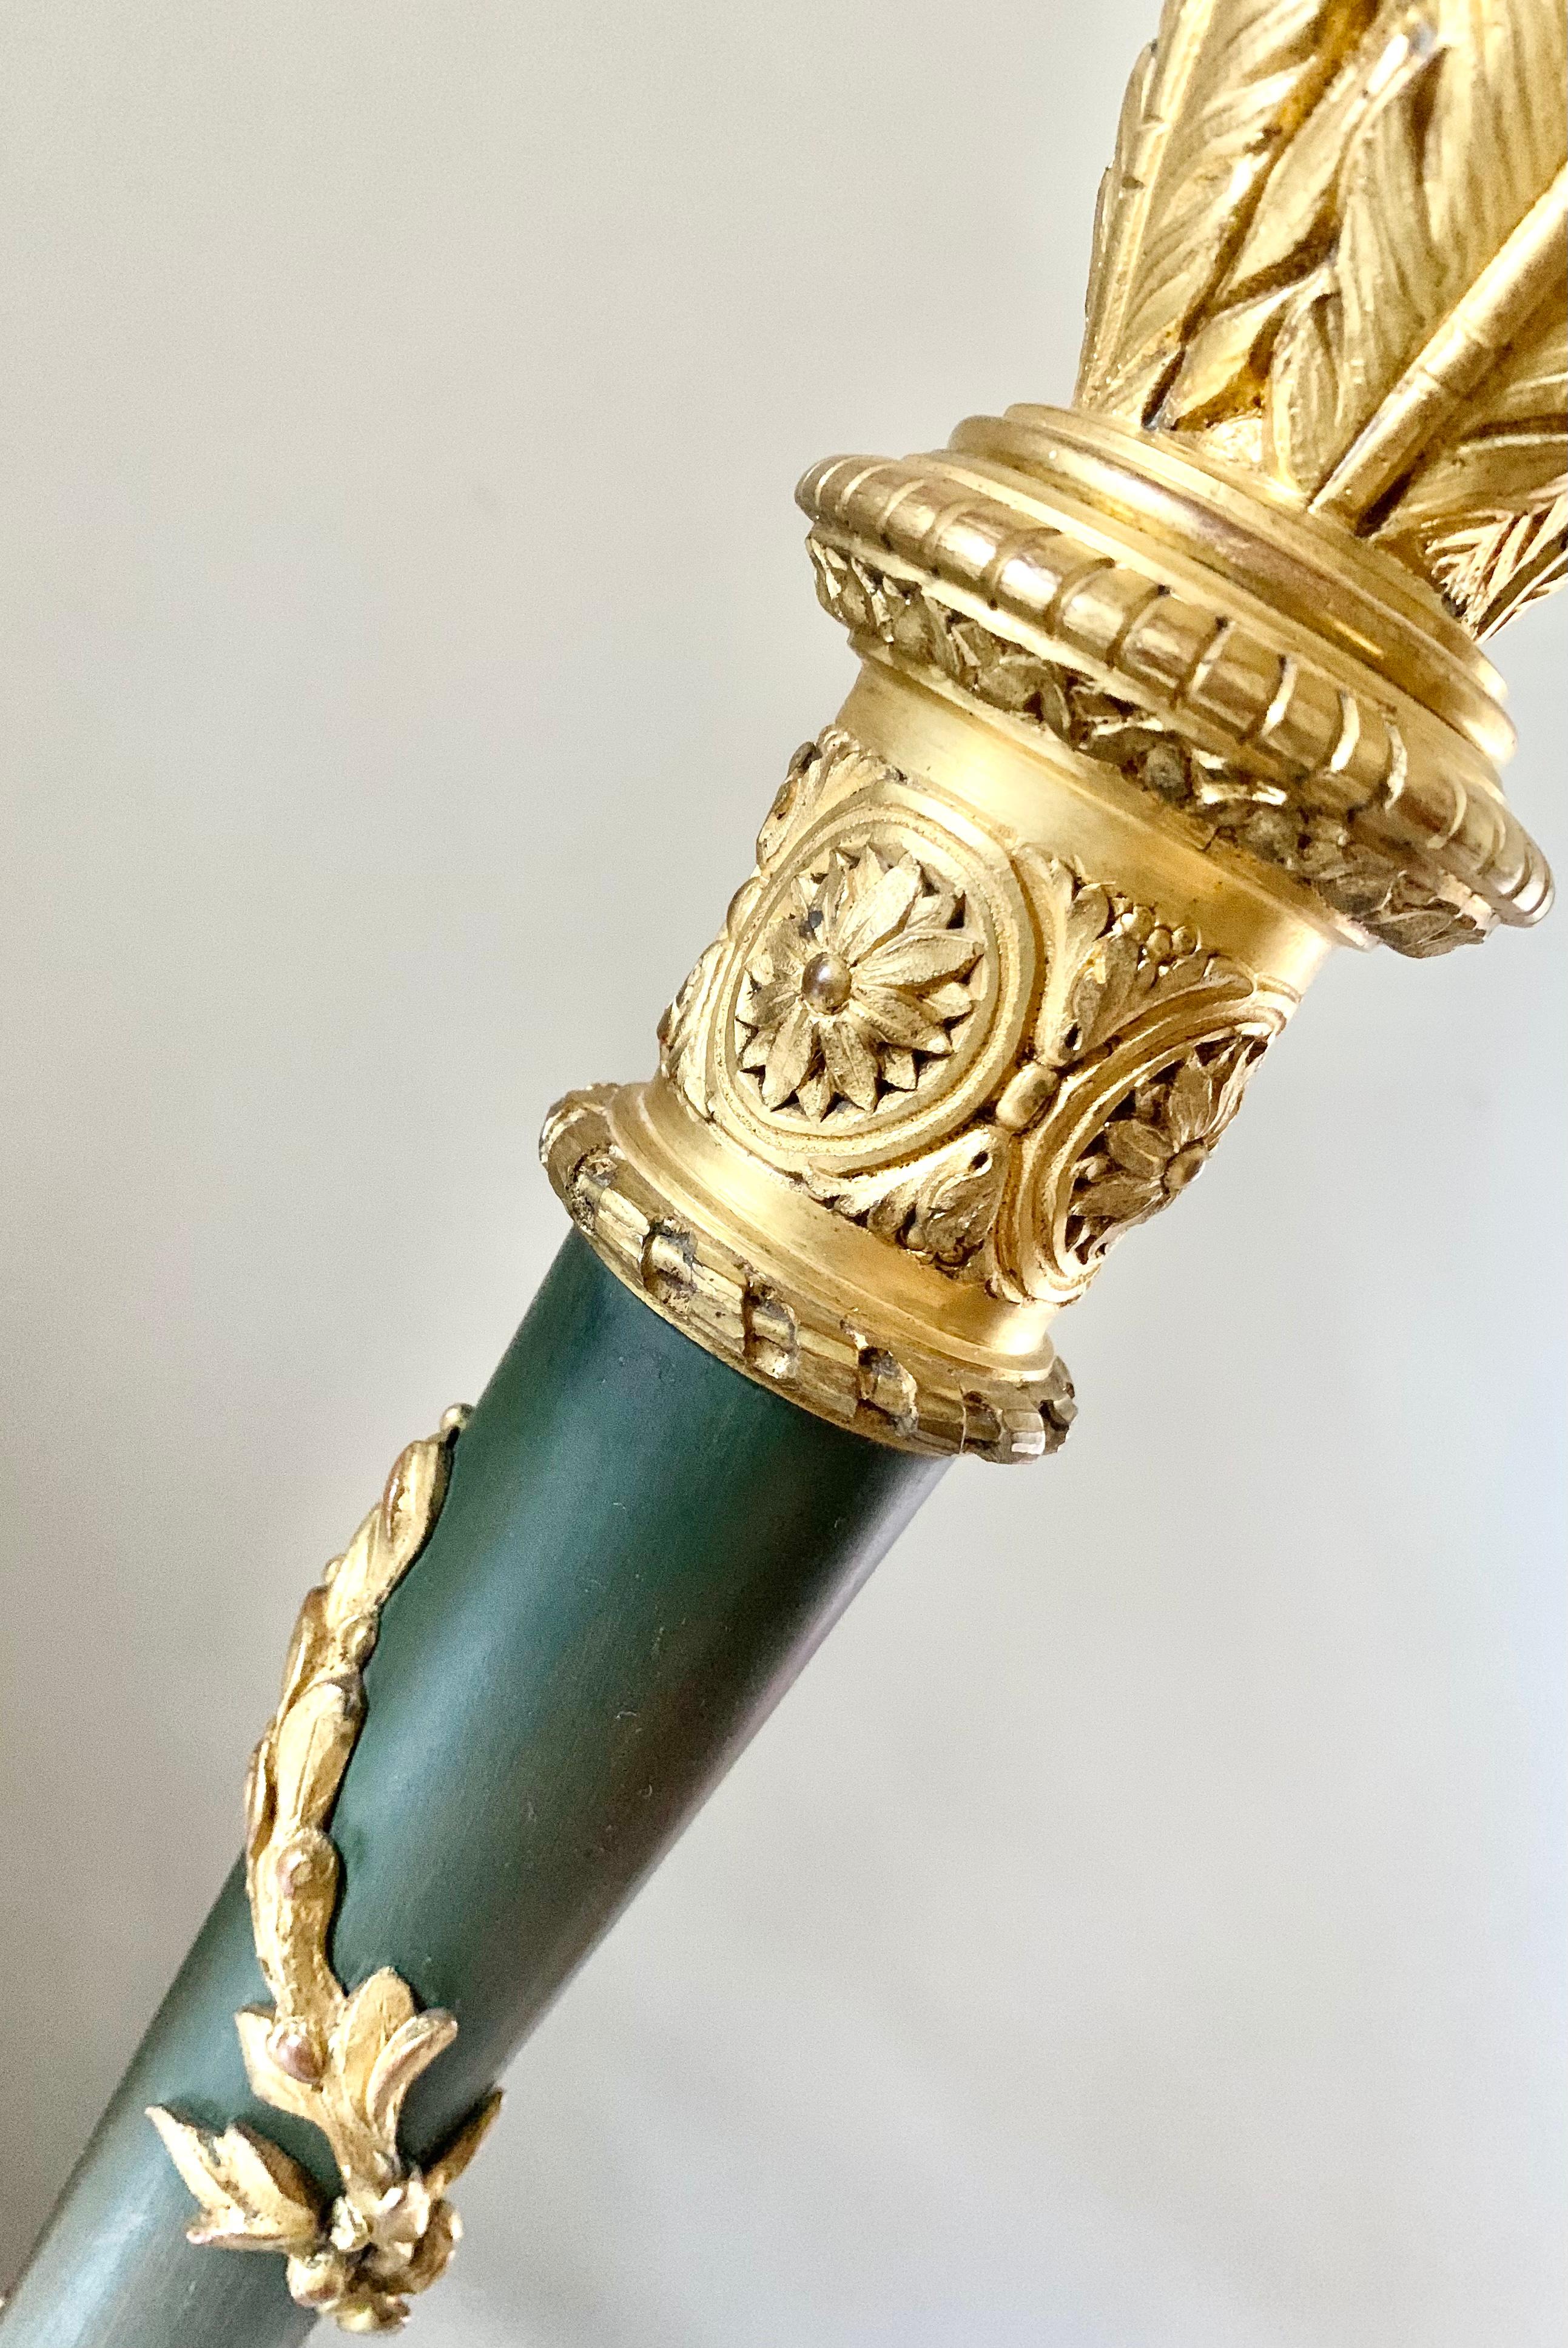 Exceptional quality, attributed to Maison Gagneau, Paris gilt and patinated bronze desk lamp designed as a quiver of arrows in the Neoclassical taste. Circular base with laurel leaf wreath motif supporting a patinated bronze flaring quiver with a